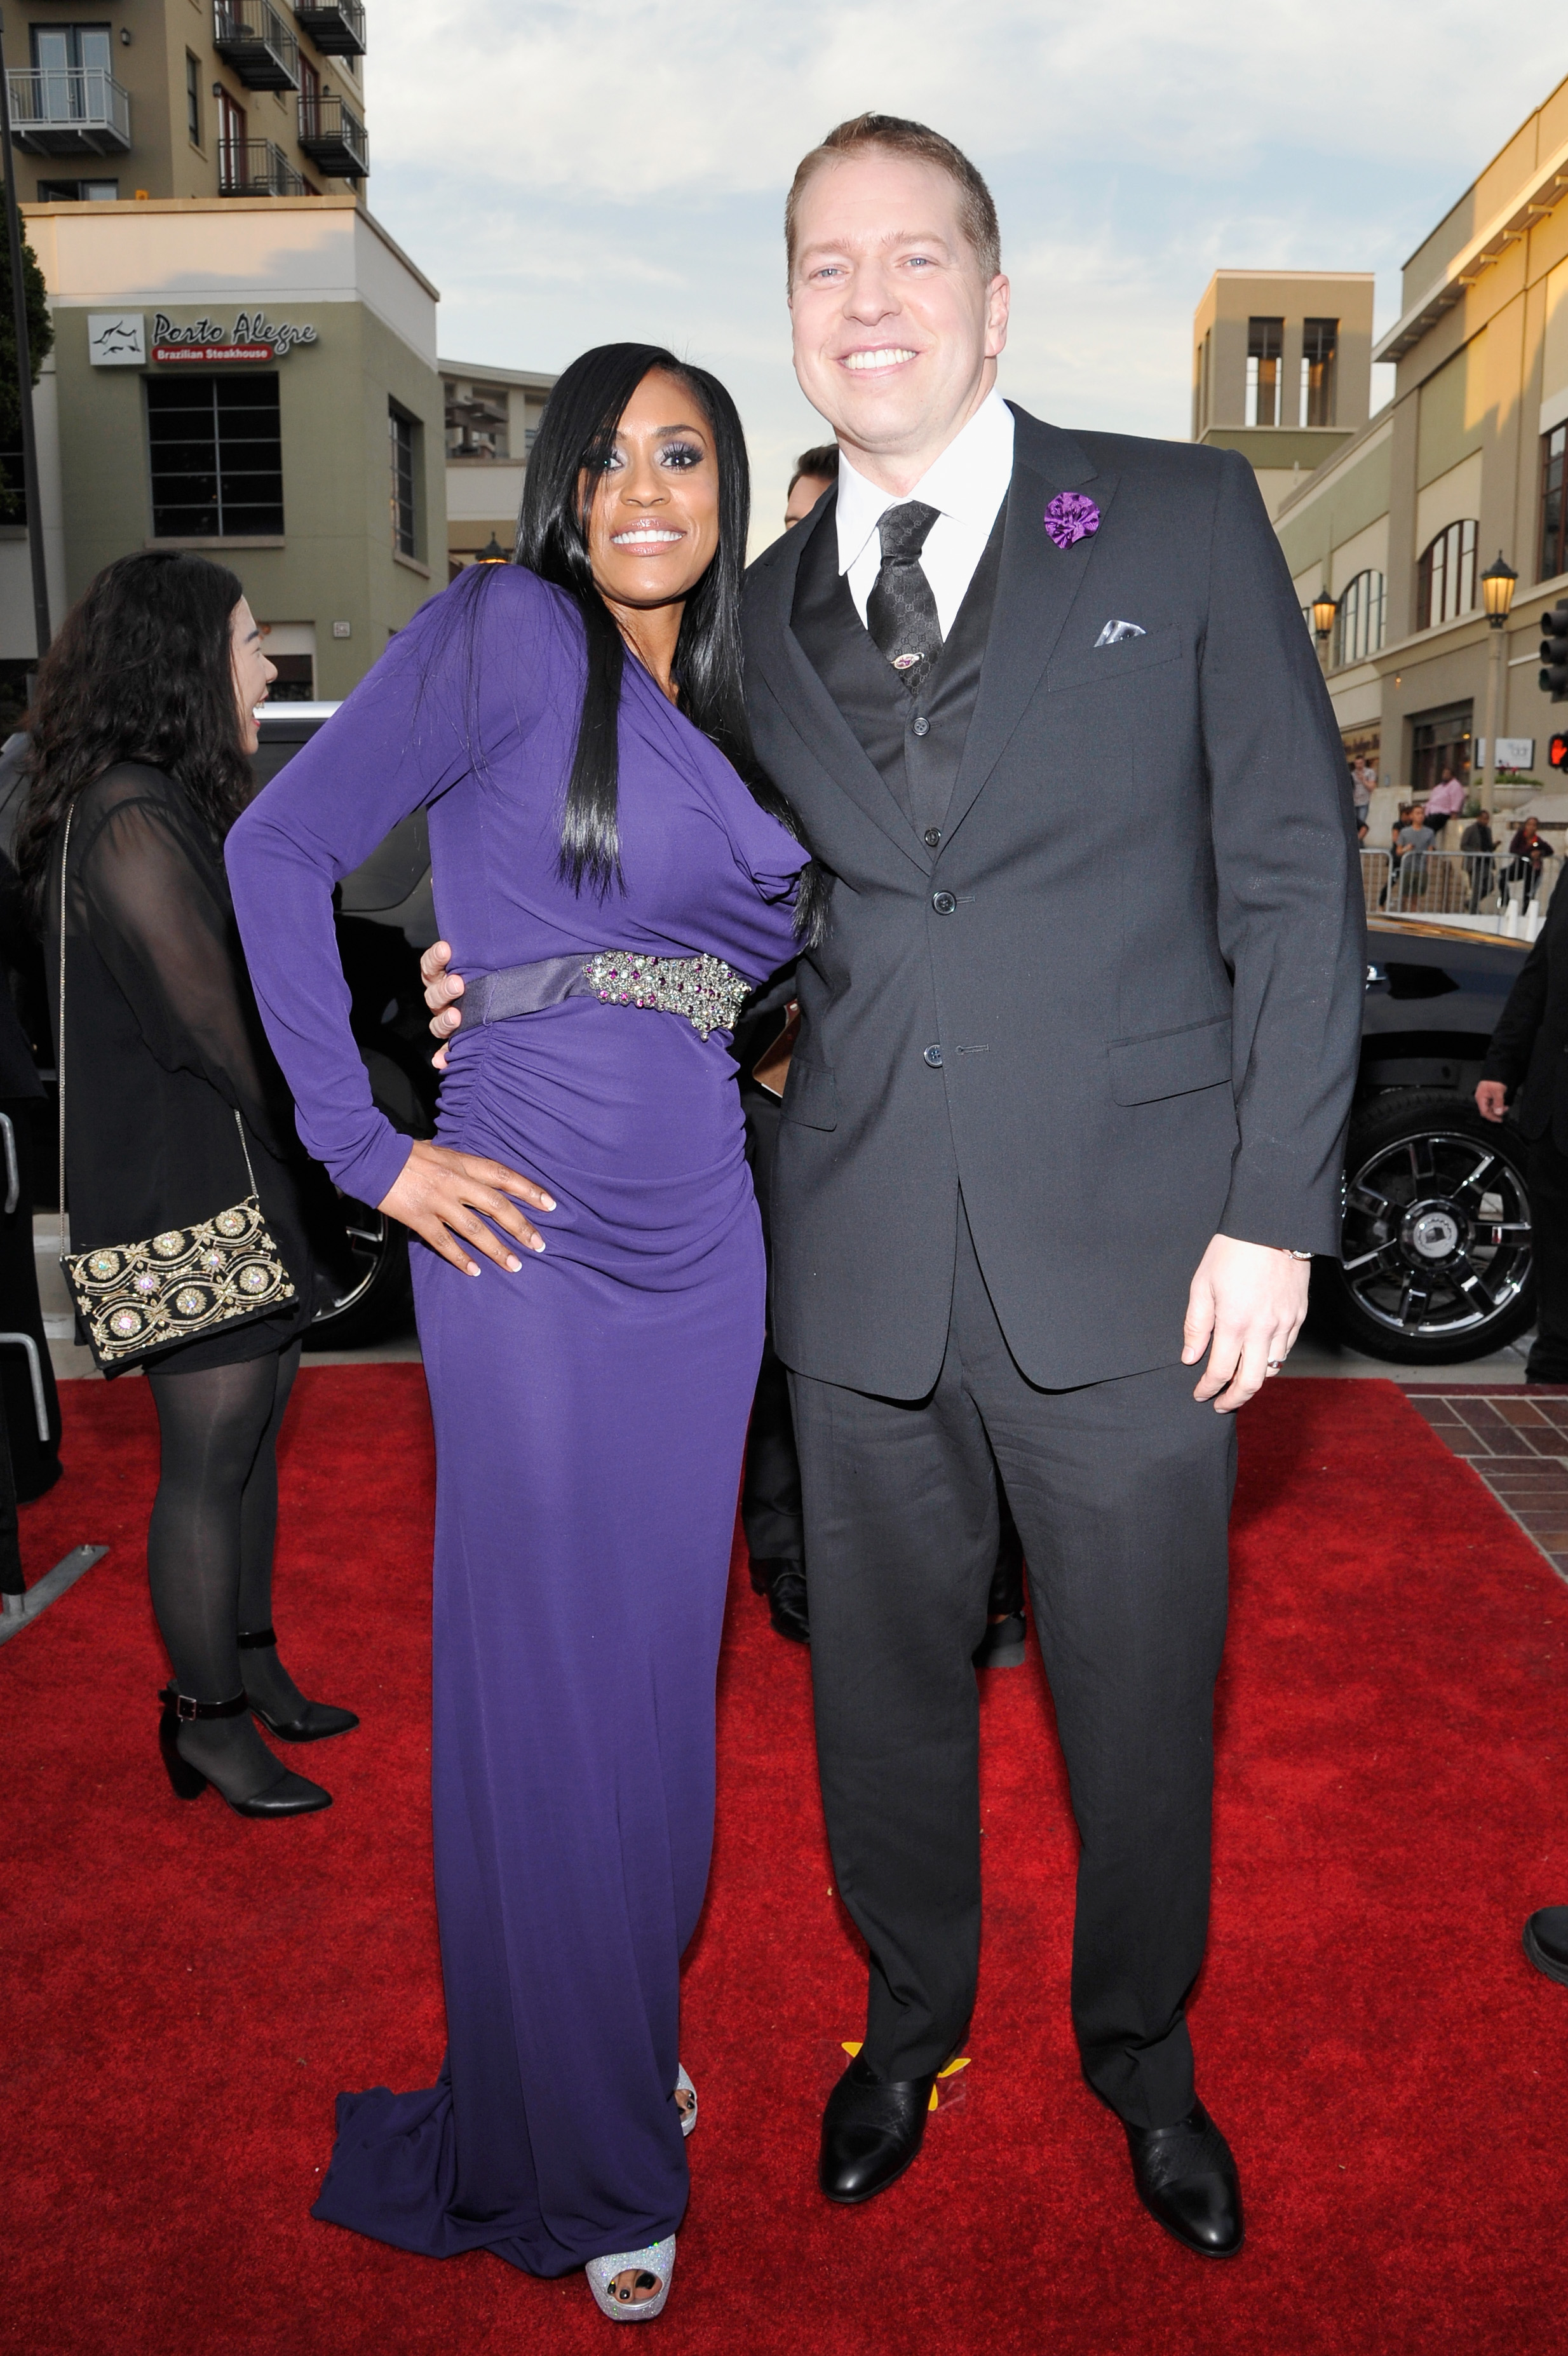 Gary Owen and Kenya Duke were married for 18 years before calling it quits